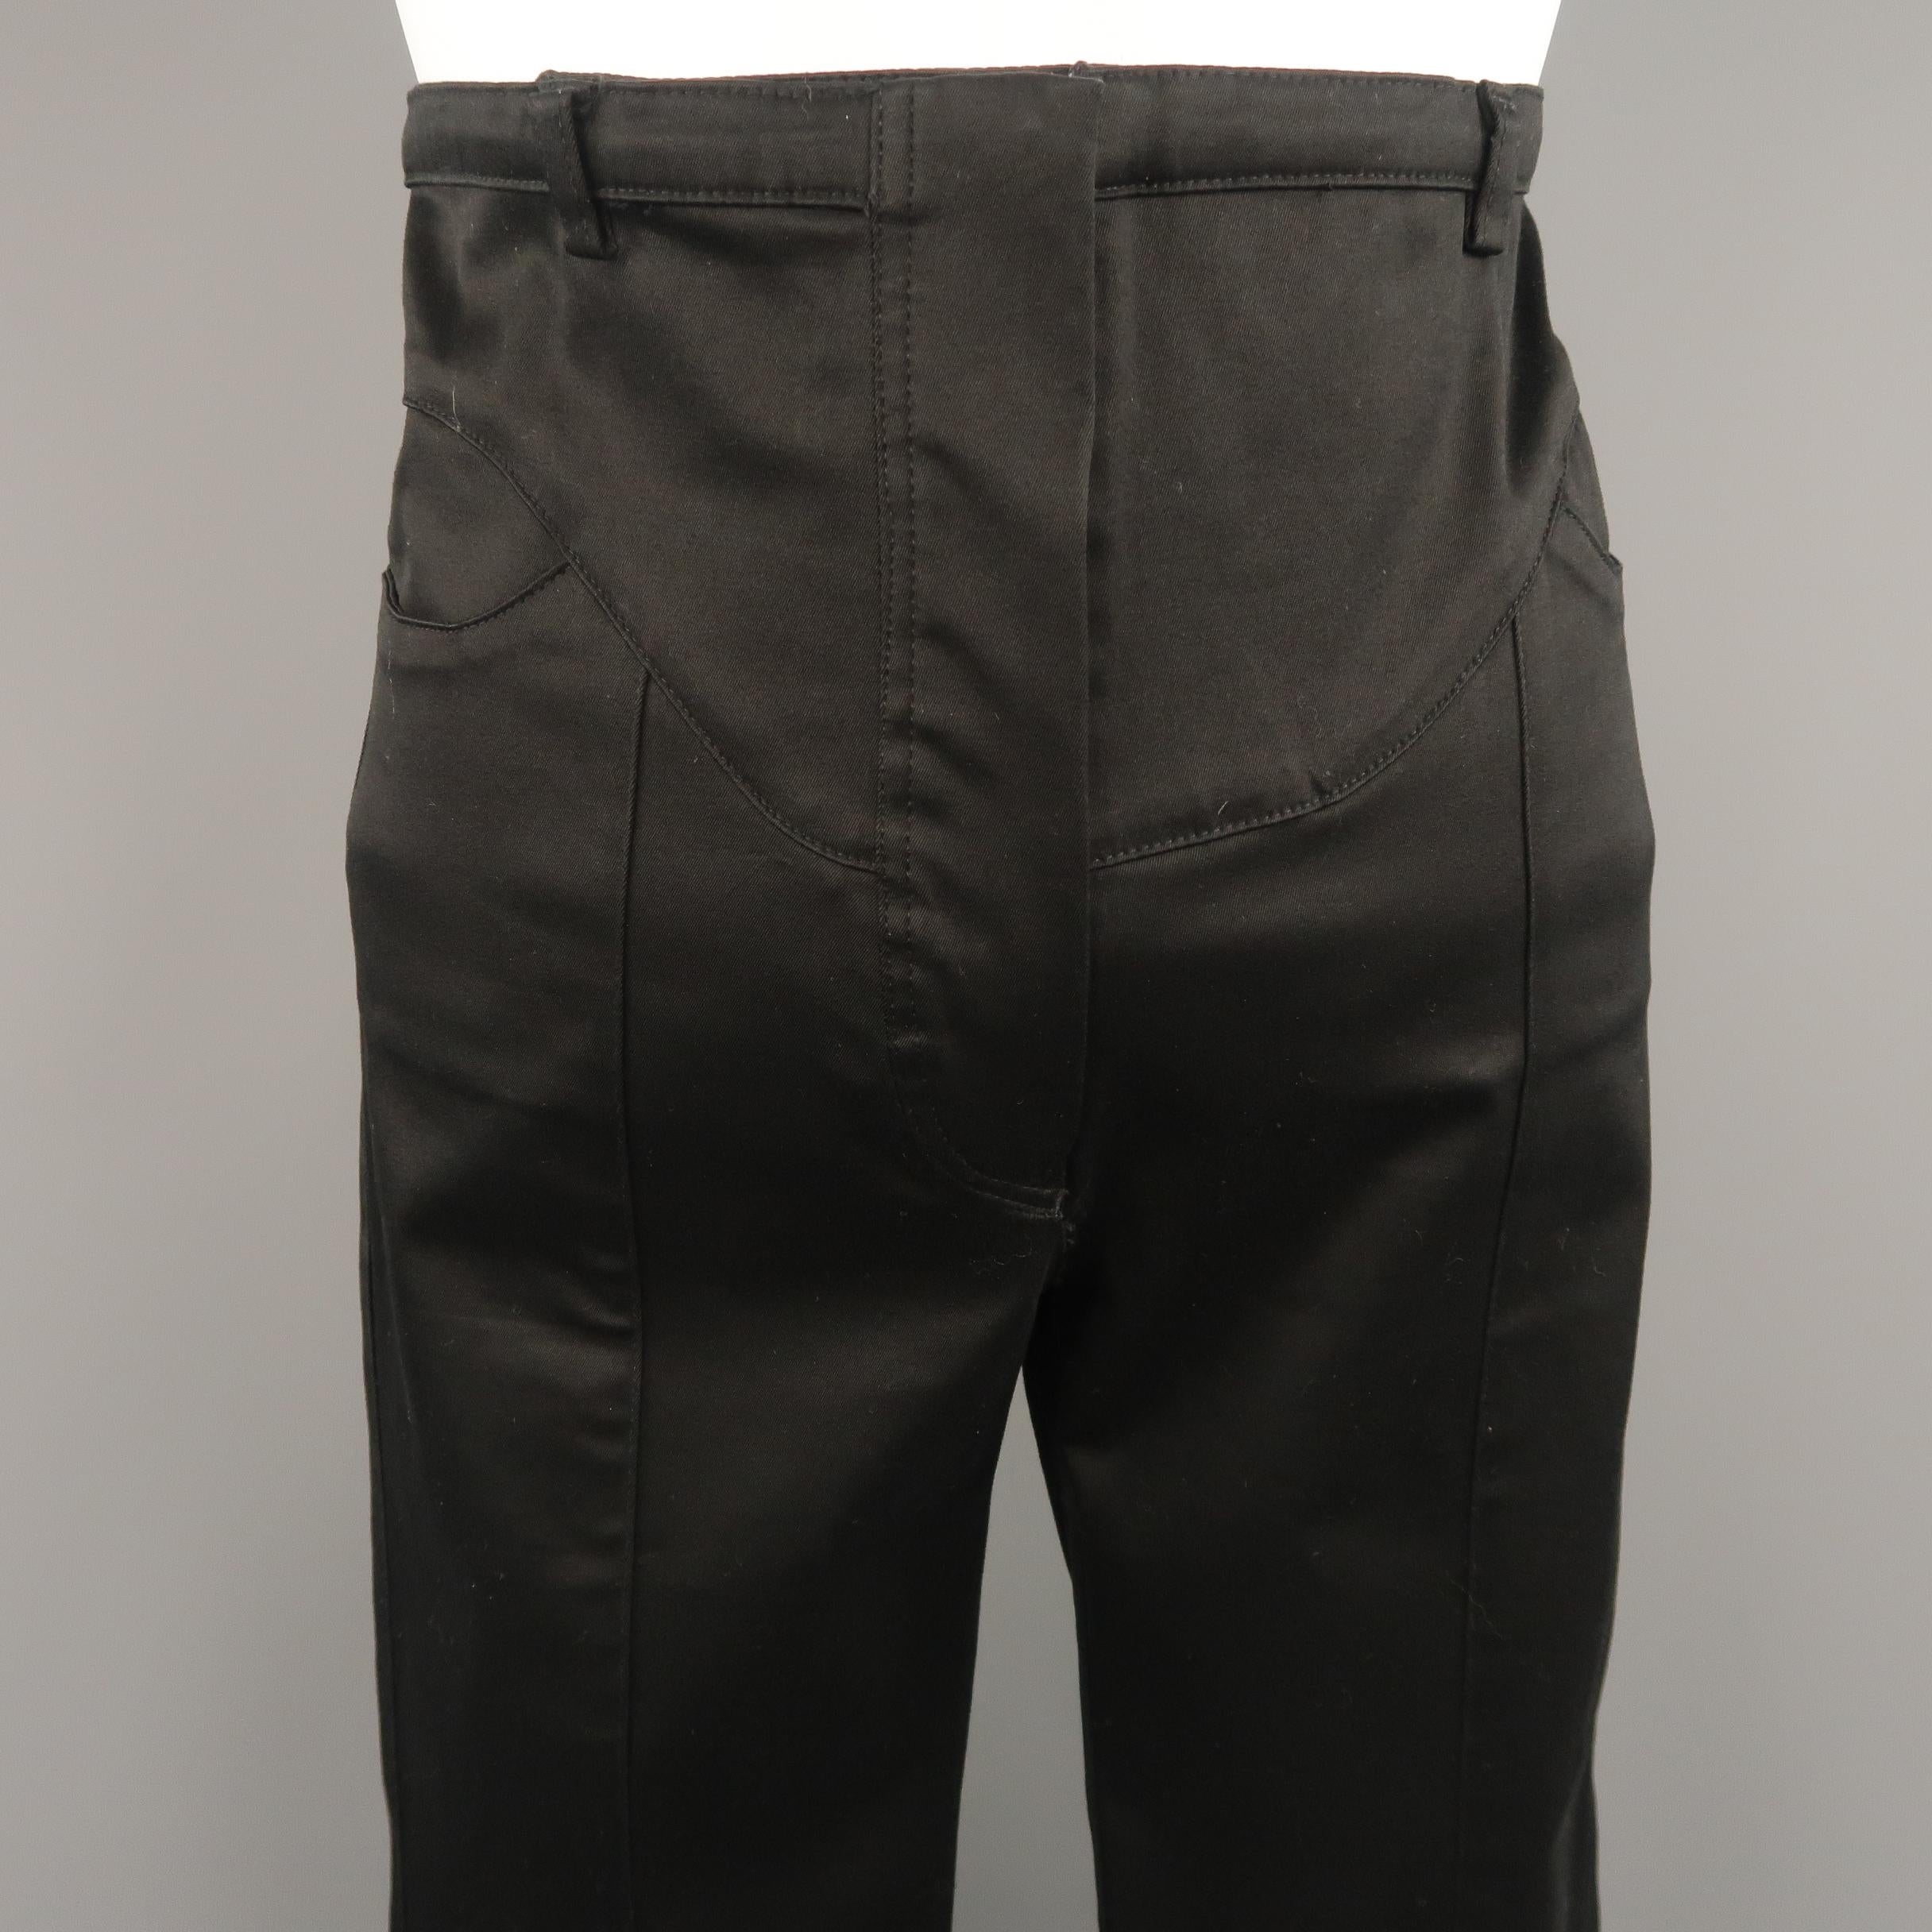 BALENCIAGA pants come in black cotton twill with a high rise, skinny leg, and abstract motorcycle details. Made in Portugal.
 
Excellent Pre-Owned Condition.
Marked: FR 36
 
Measurements:
 
Waist: 27 in.
Rise: 11 in.
Inseam: 30 in.